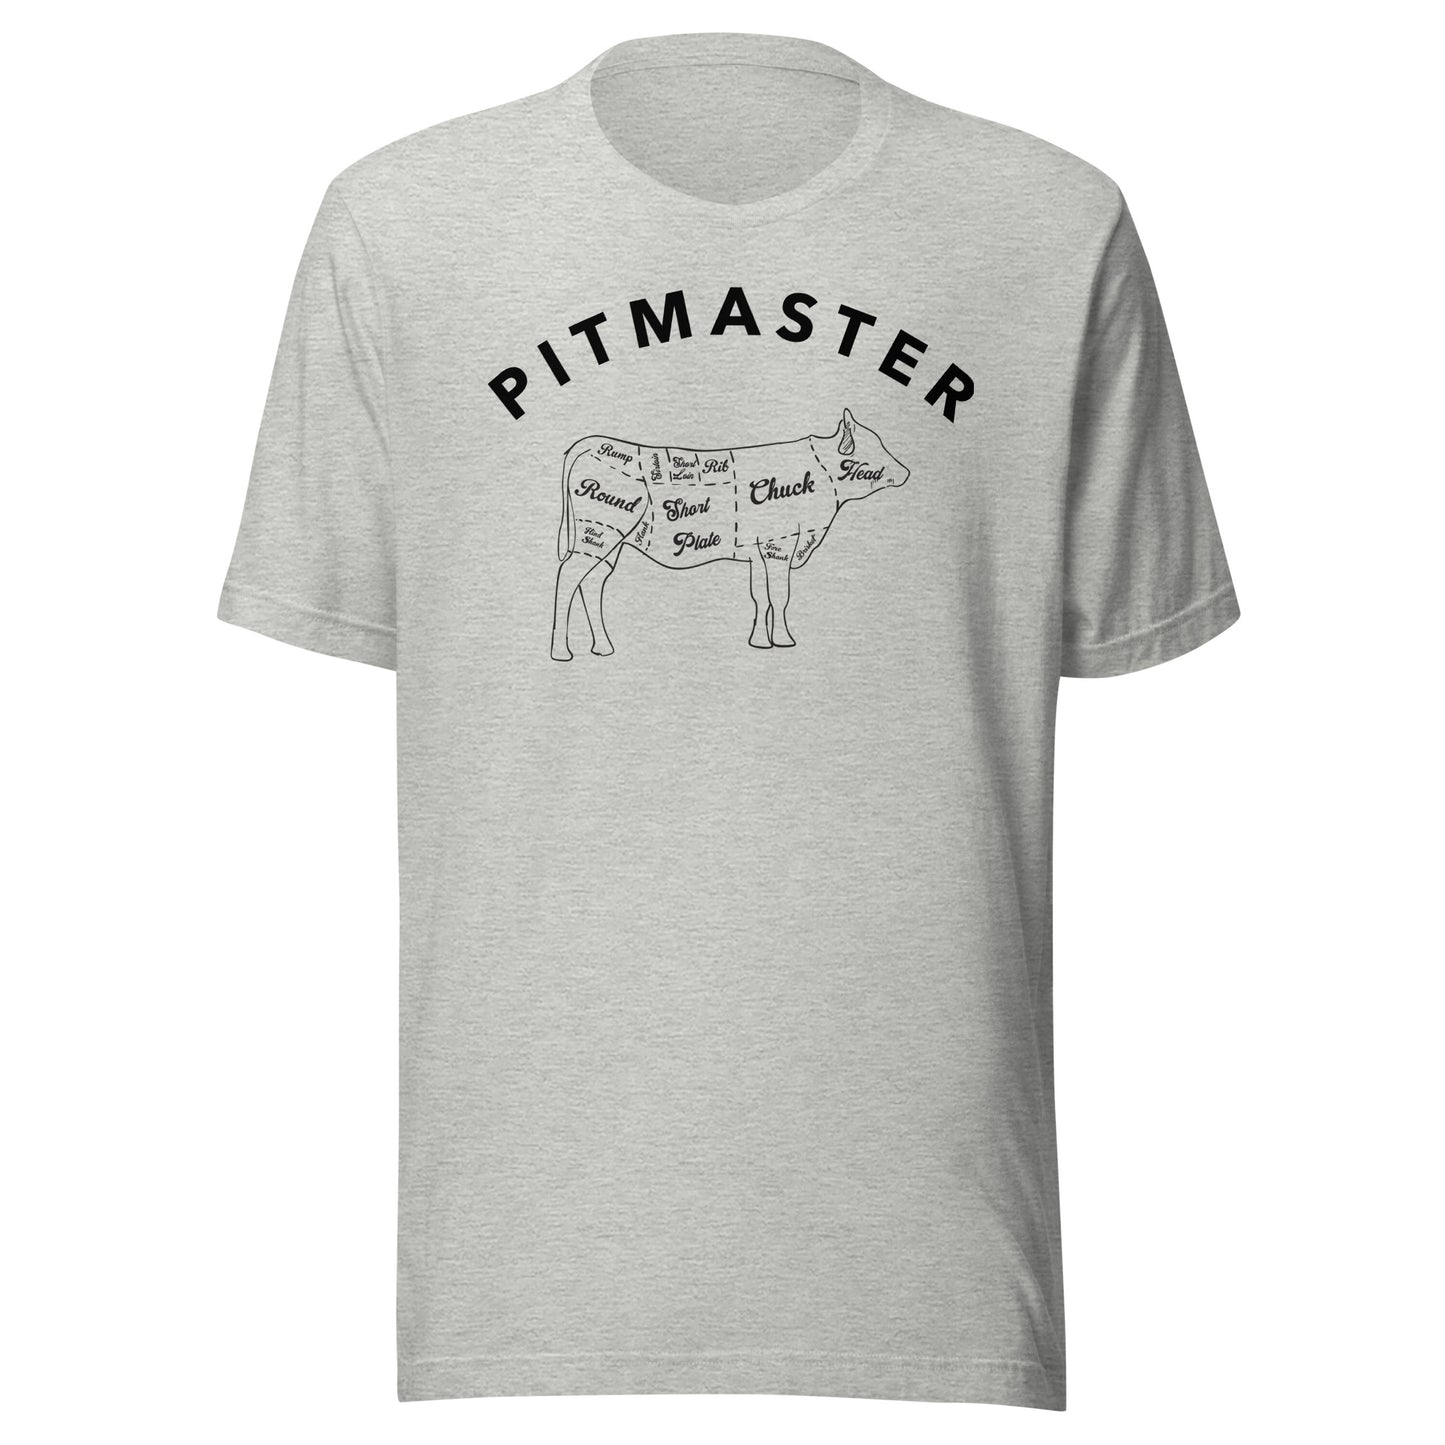 Pitmaster t-shirt - Beef edition